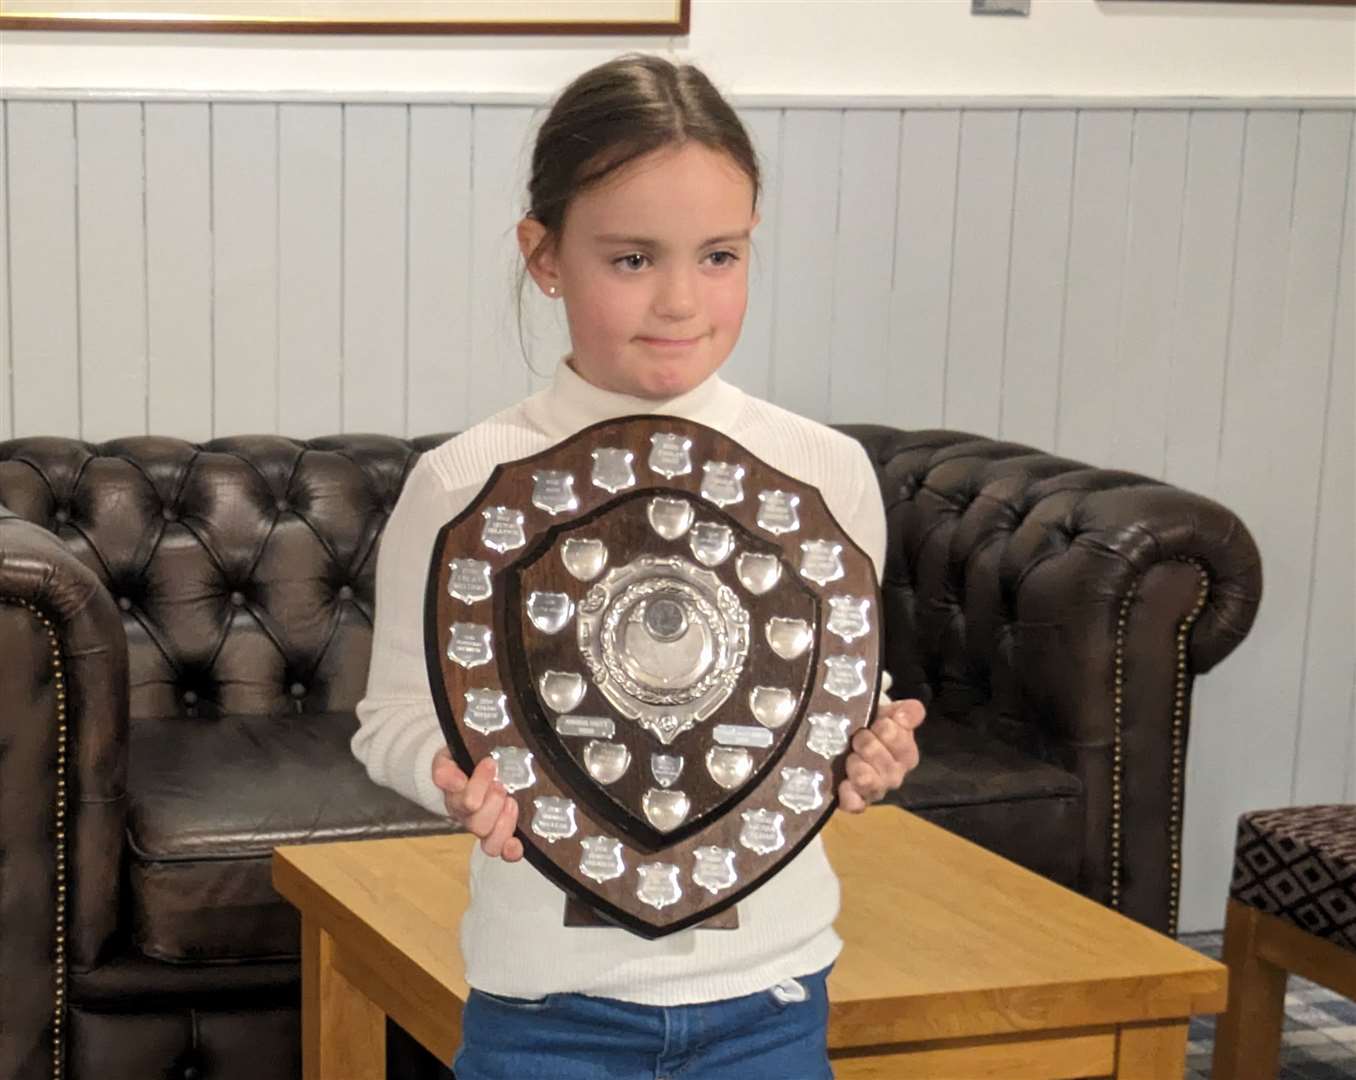 Ruby Stevenson, of Invershin, took home a handsome shield after coming top in the 10 and under category of Inverness Piping Society’s junior piping competition, held at the city's Army Reserve Centre last Saturday.